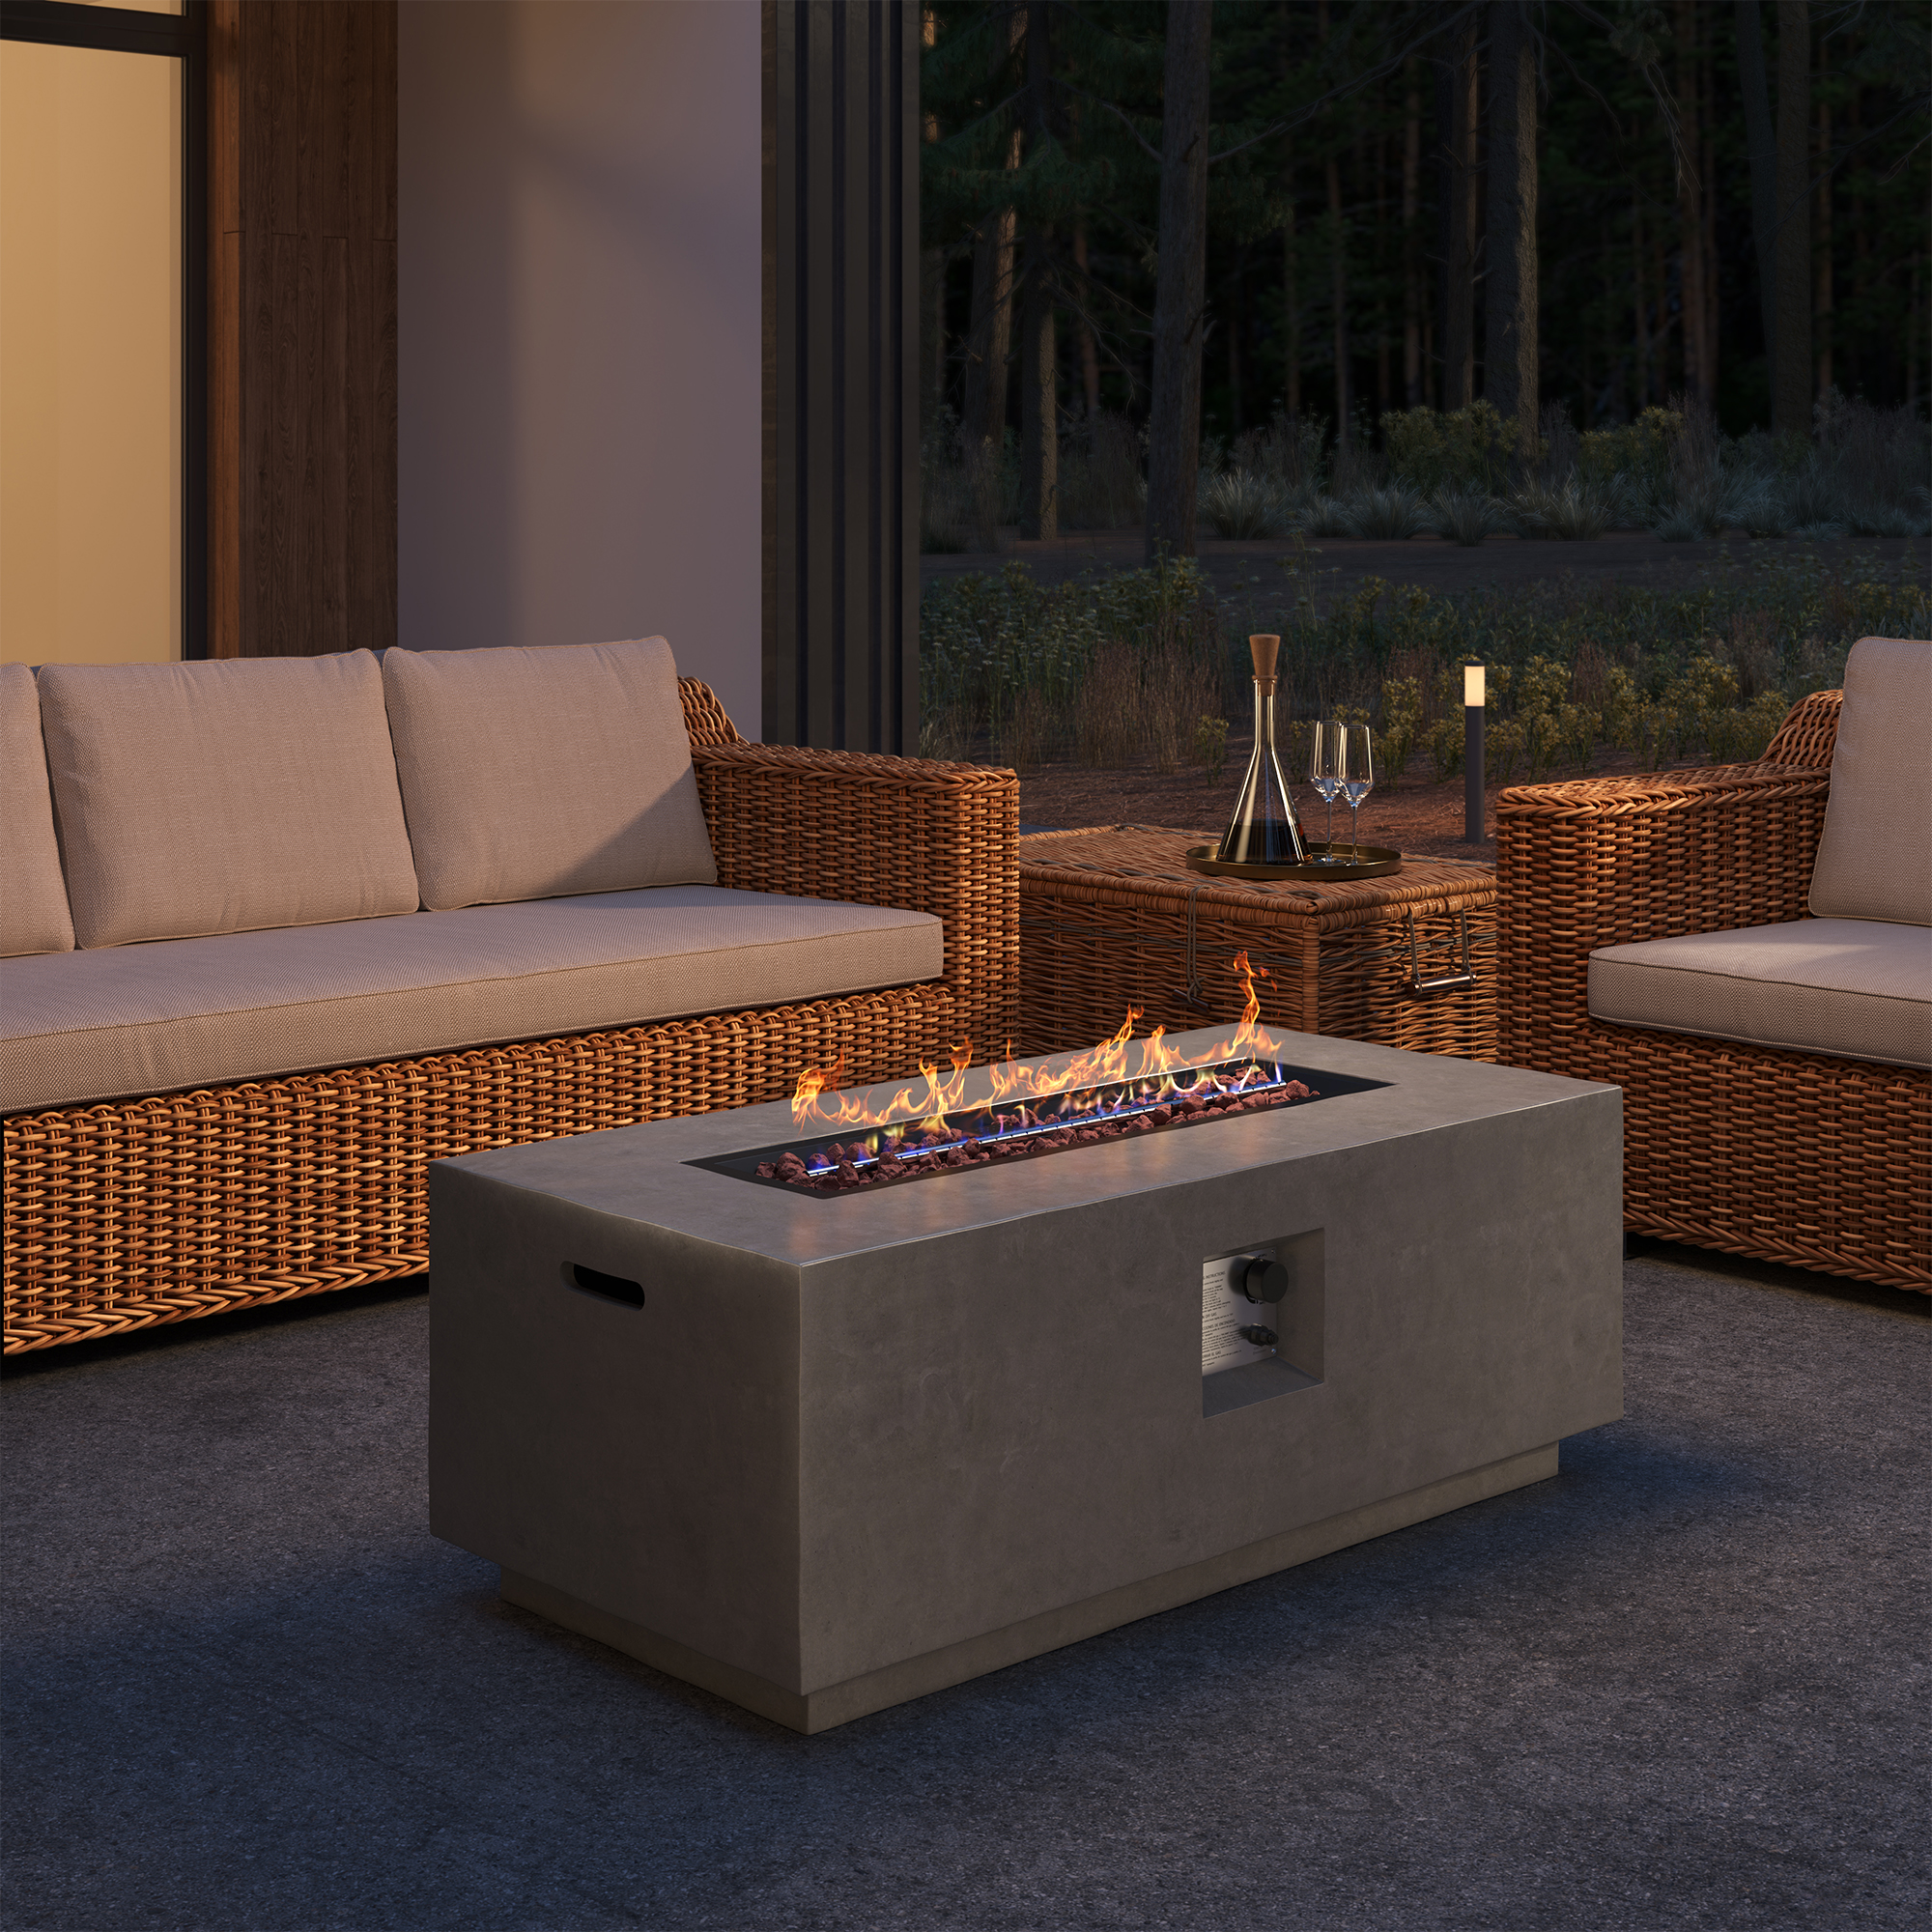 Autumn Vibes-Patio Fureniture with Fire Pits